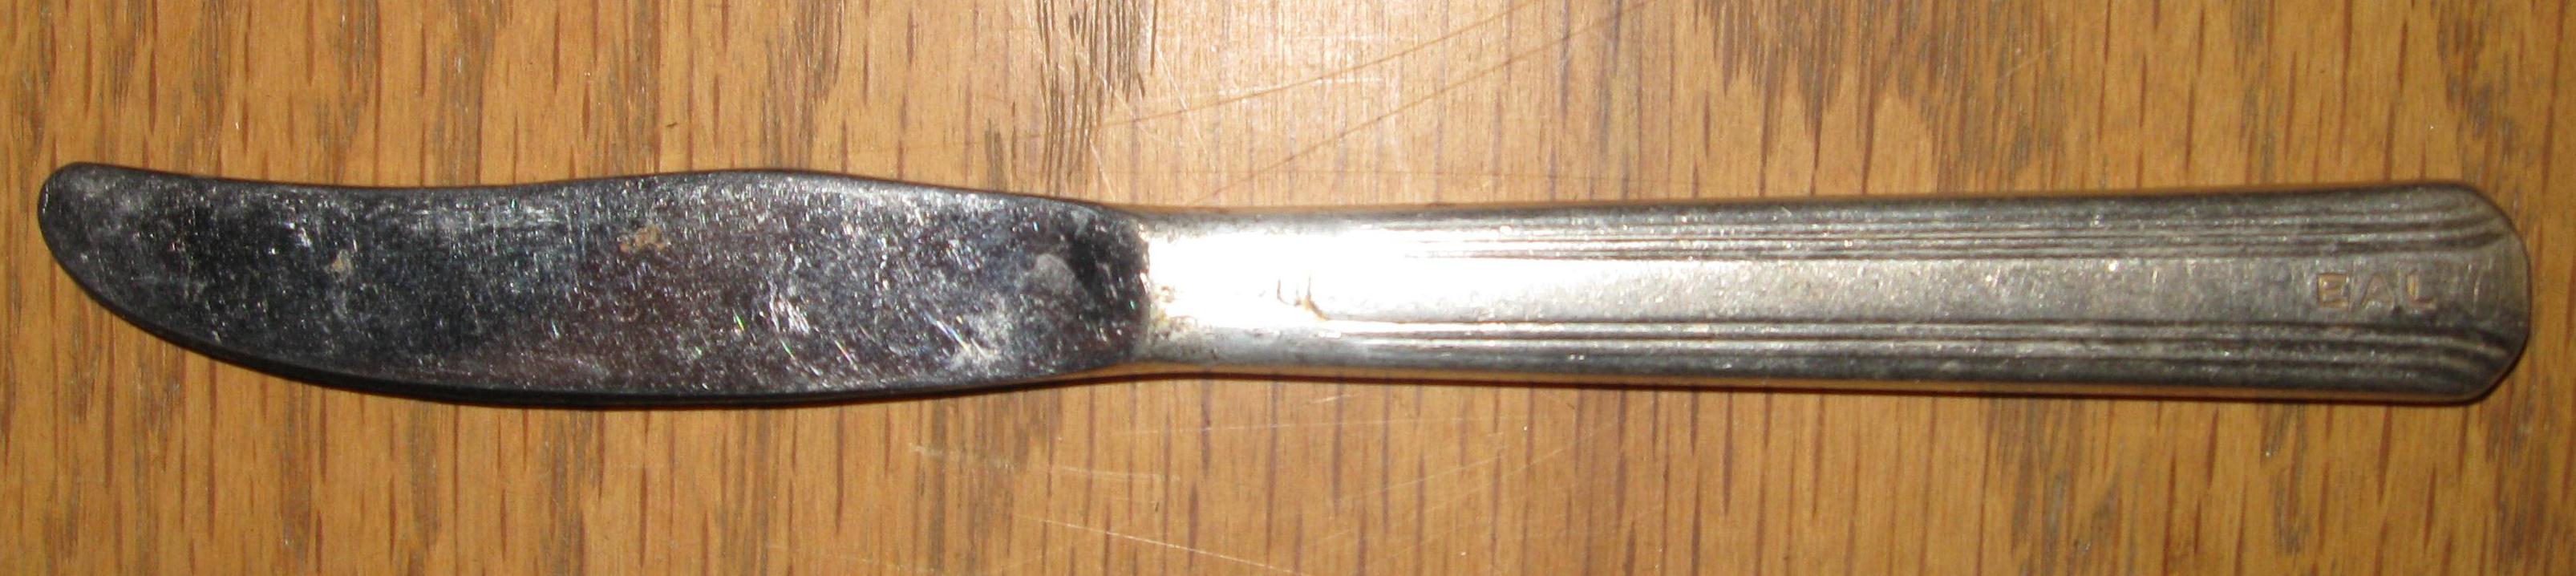 Eastern Airlines silver plate stainless knife